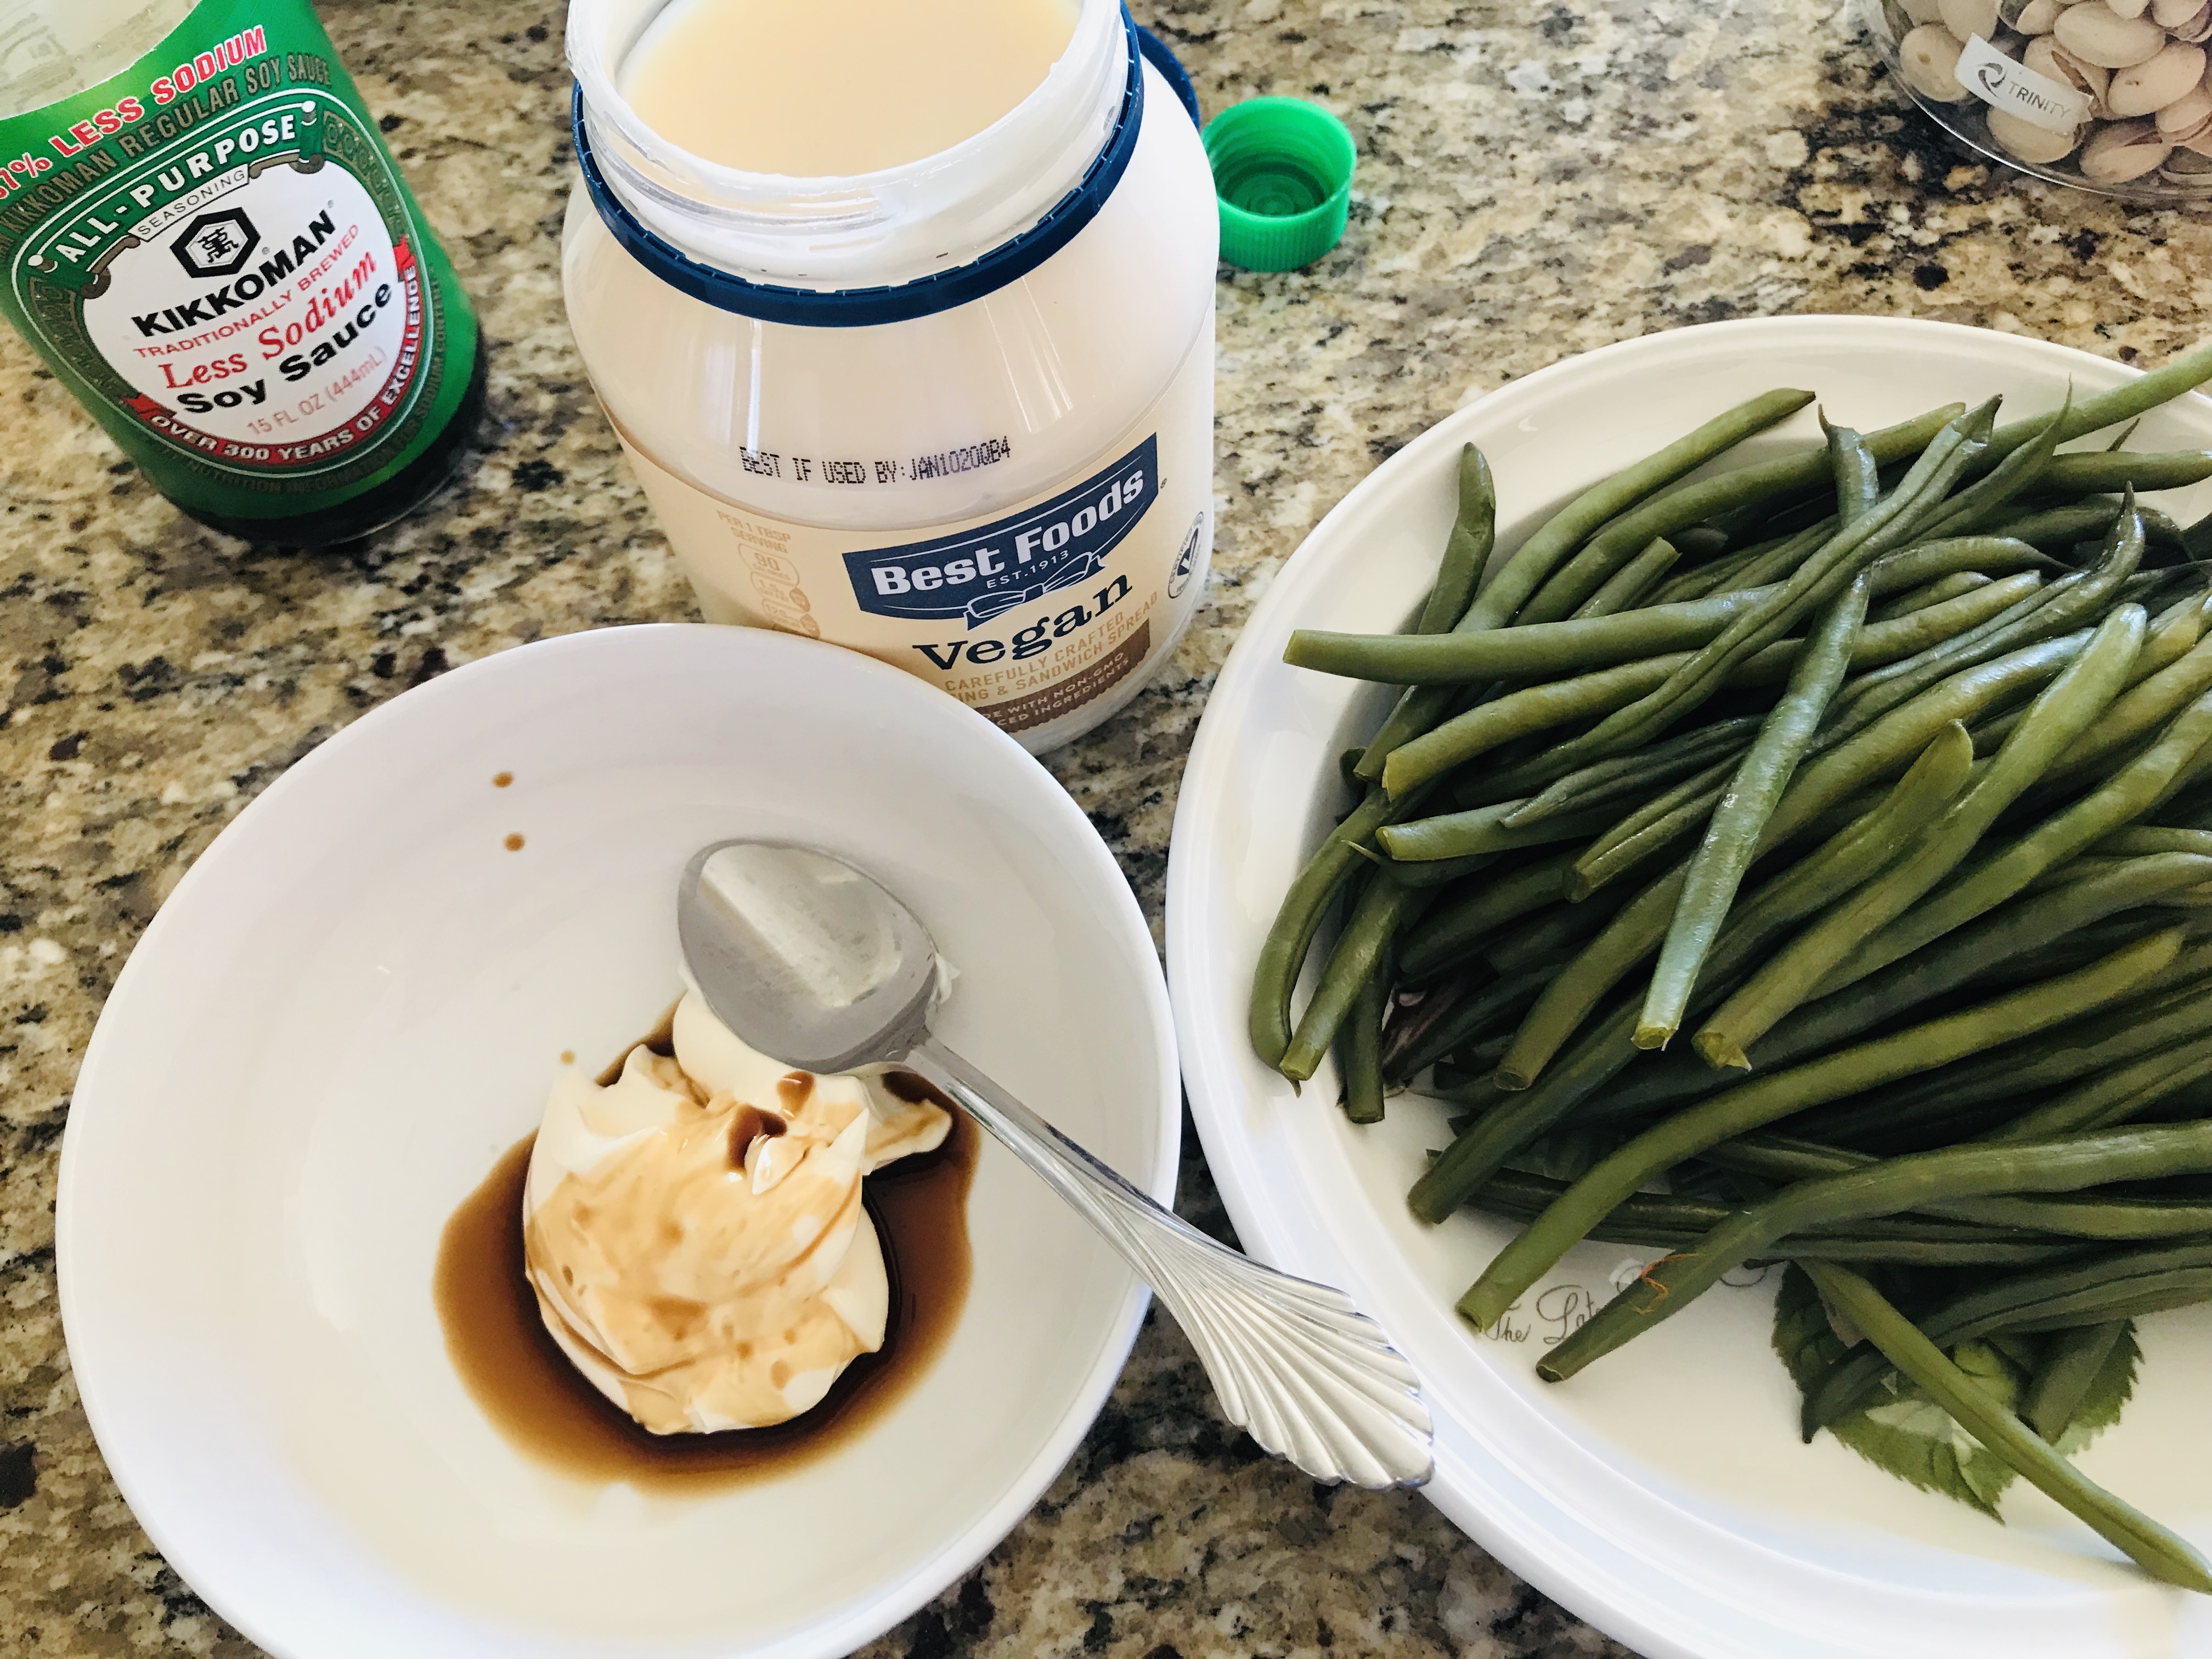 Bowl mixture of vegan mayonnaise and soy sauce with plate of green beans